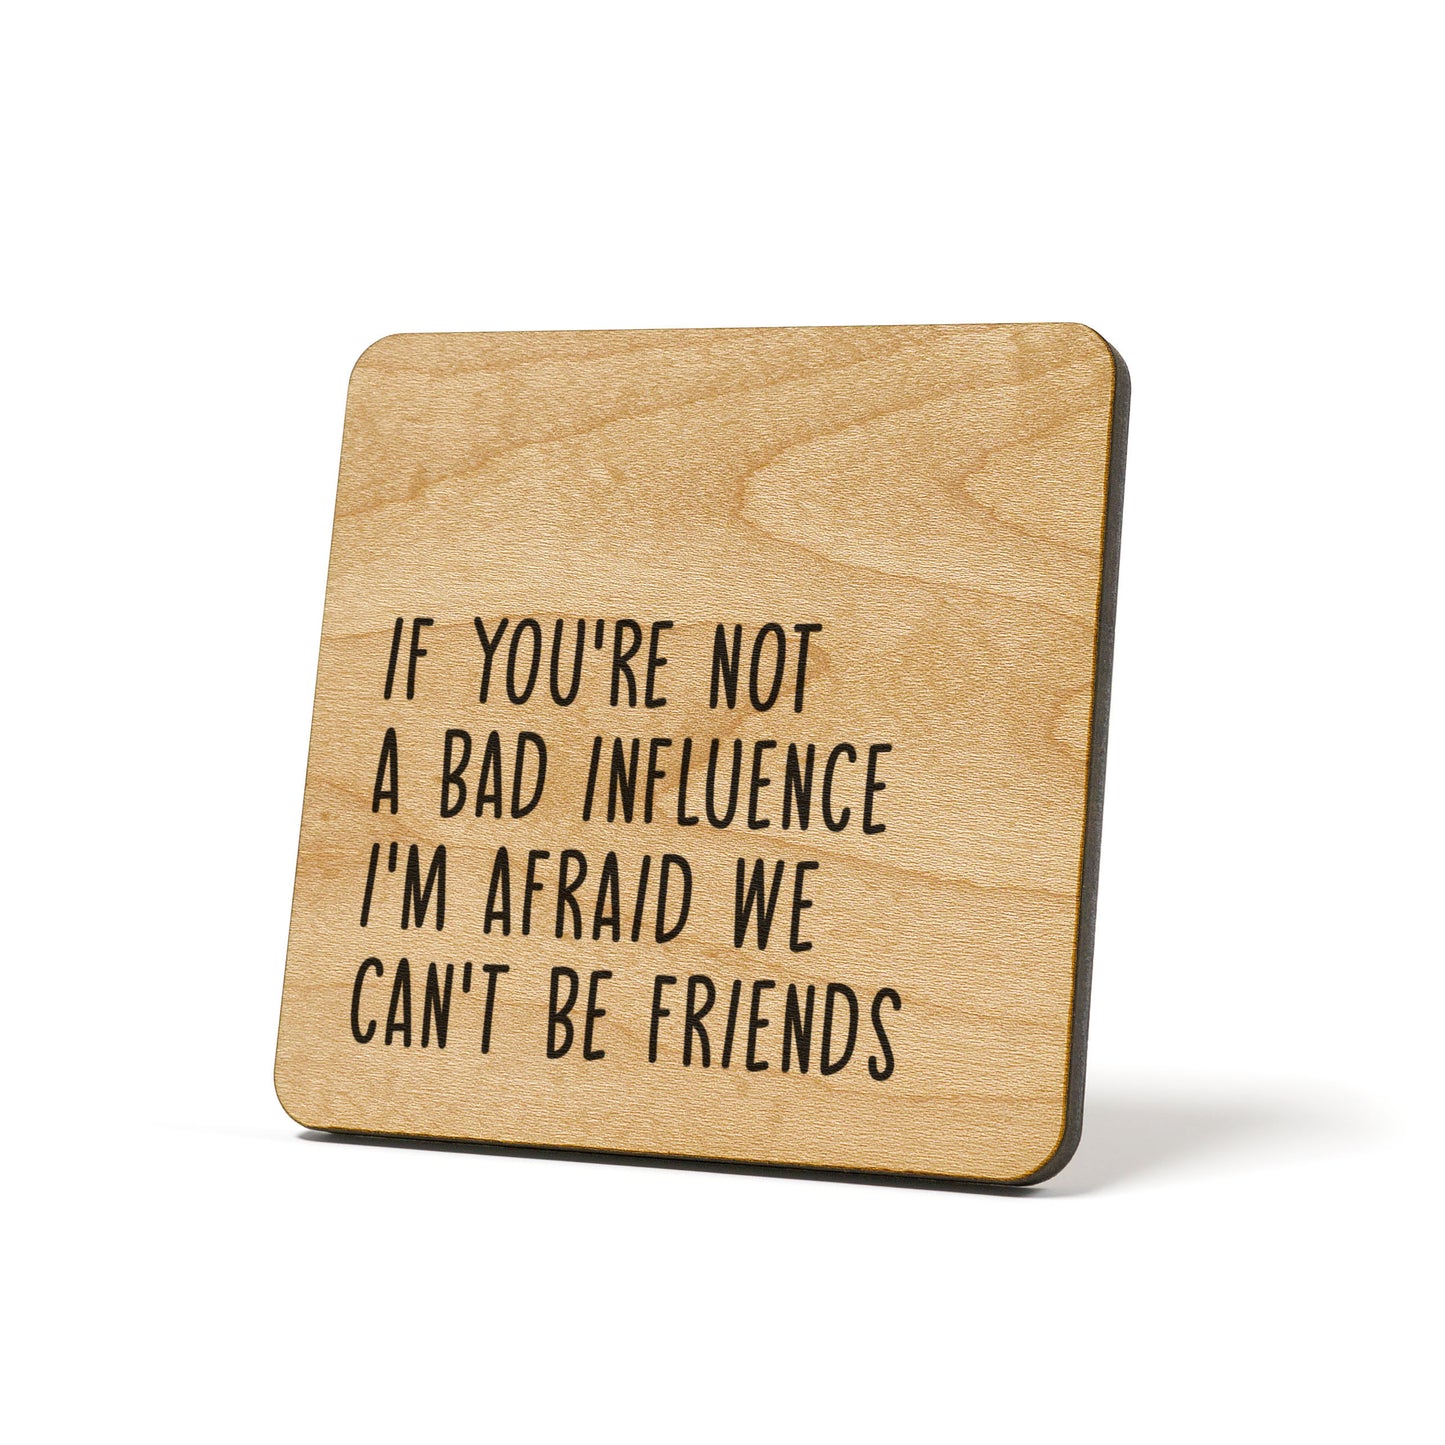 If you're not a bad influence I'm afraid we can't be friends Quote Coaster